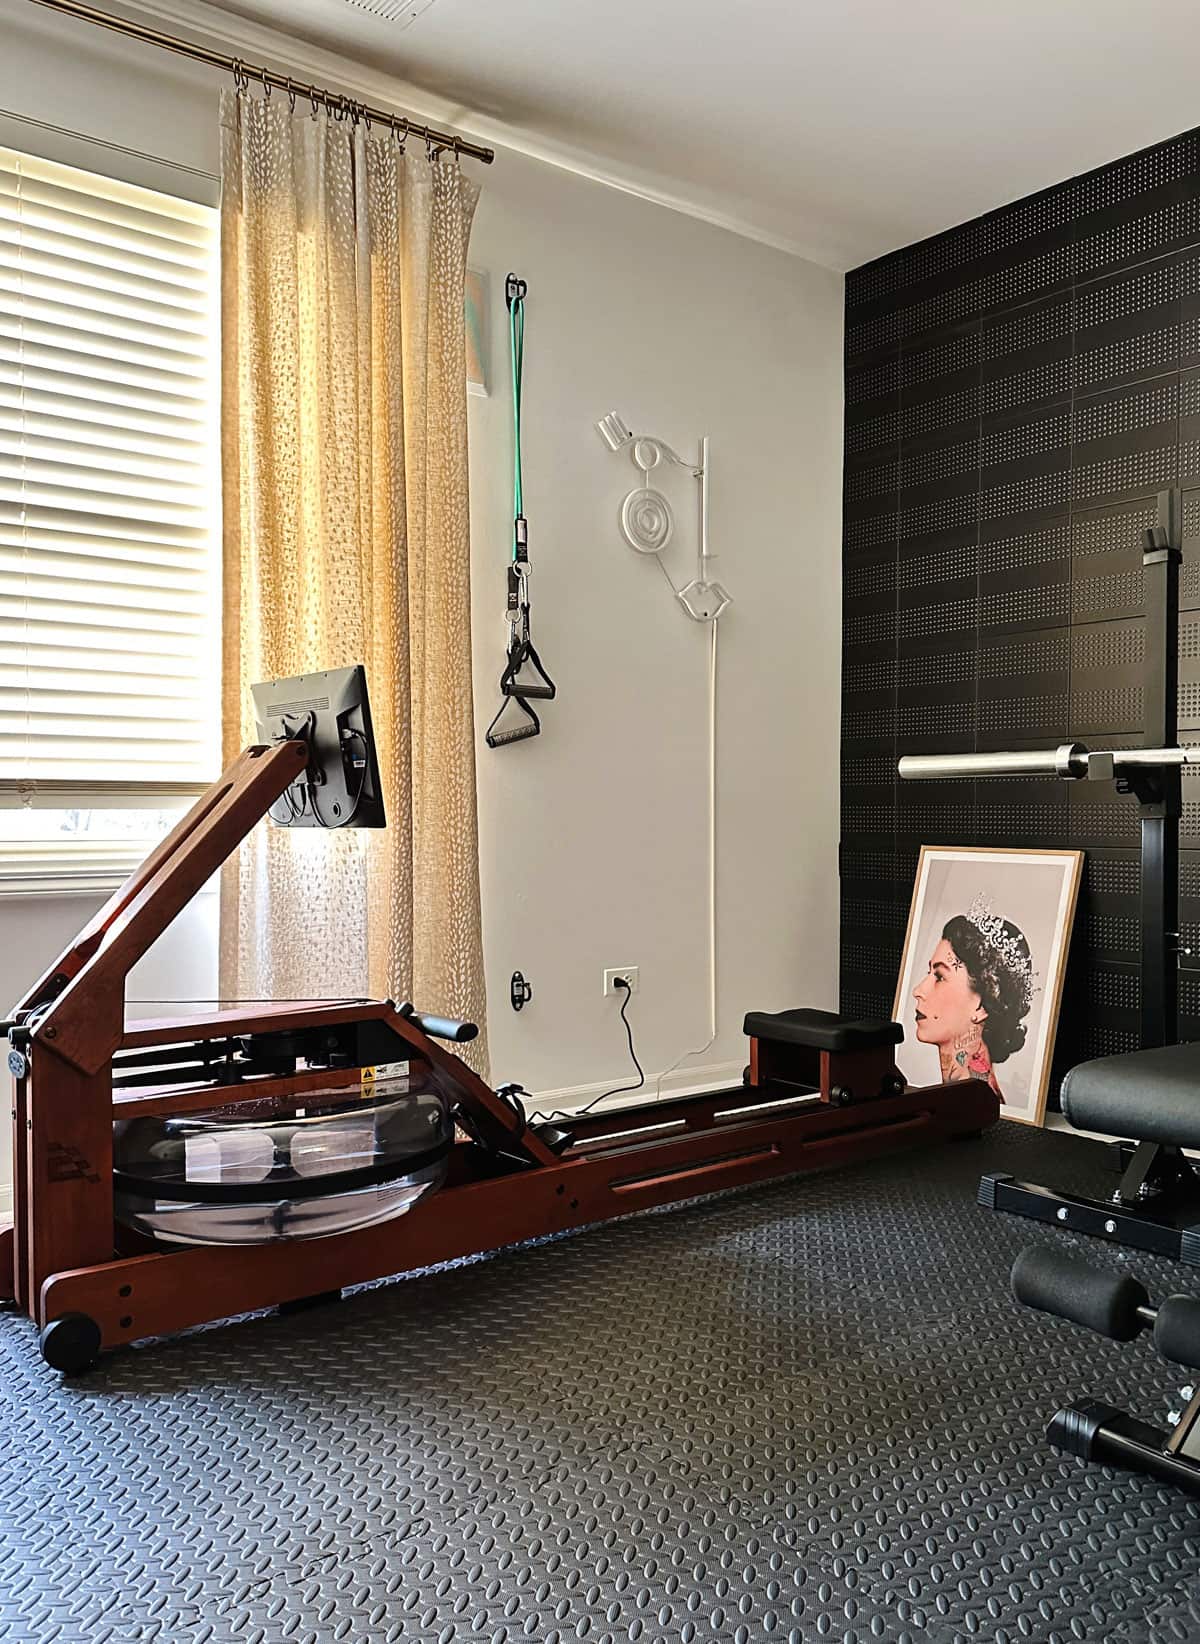 Mini Home Gym - Compact Ideas and Equipment - Small home gym room ideas with small space compact equipment. The Ergatta rower not only looks beautiful but it's a complete full body workout that will get your heart rate up! It also can be stored against the wall in small spaces.